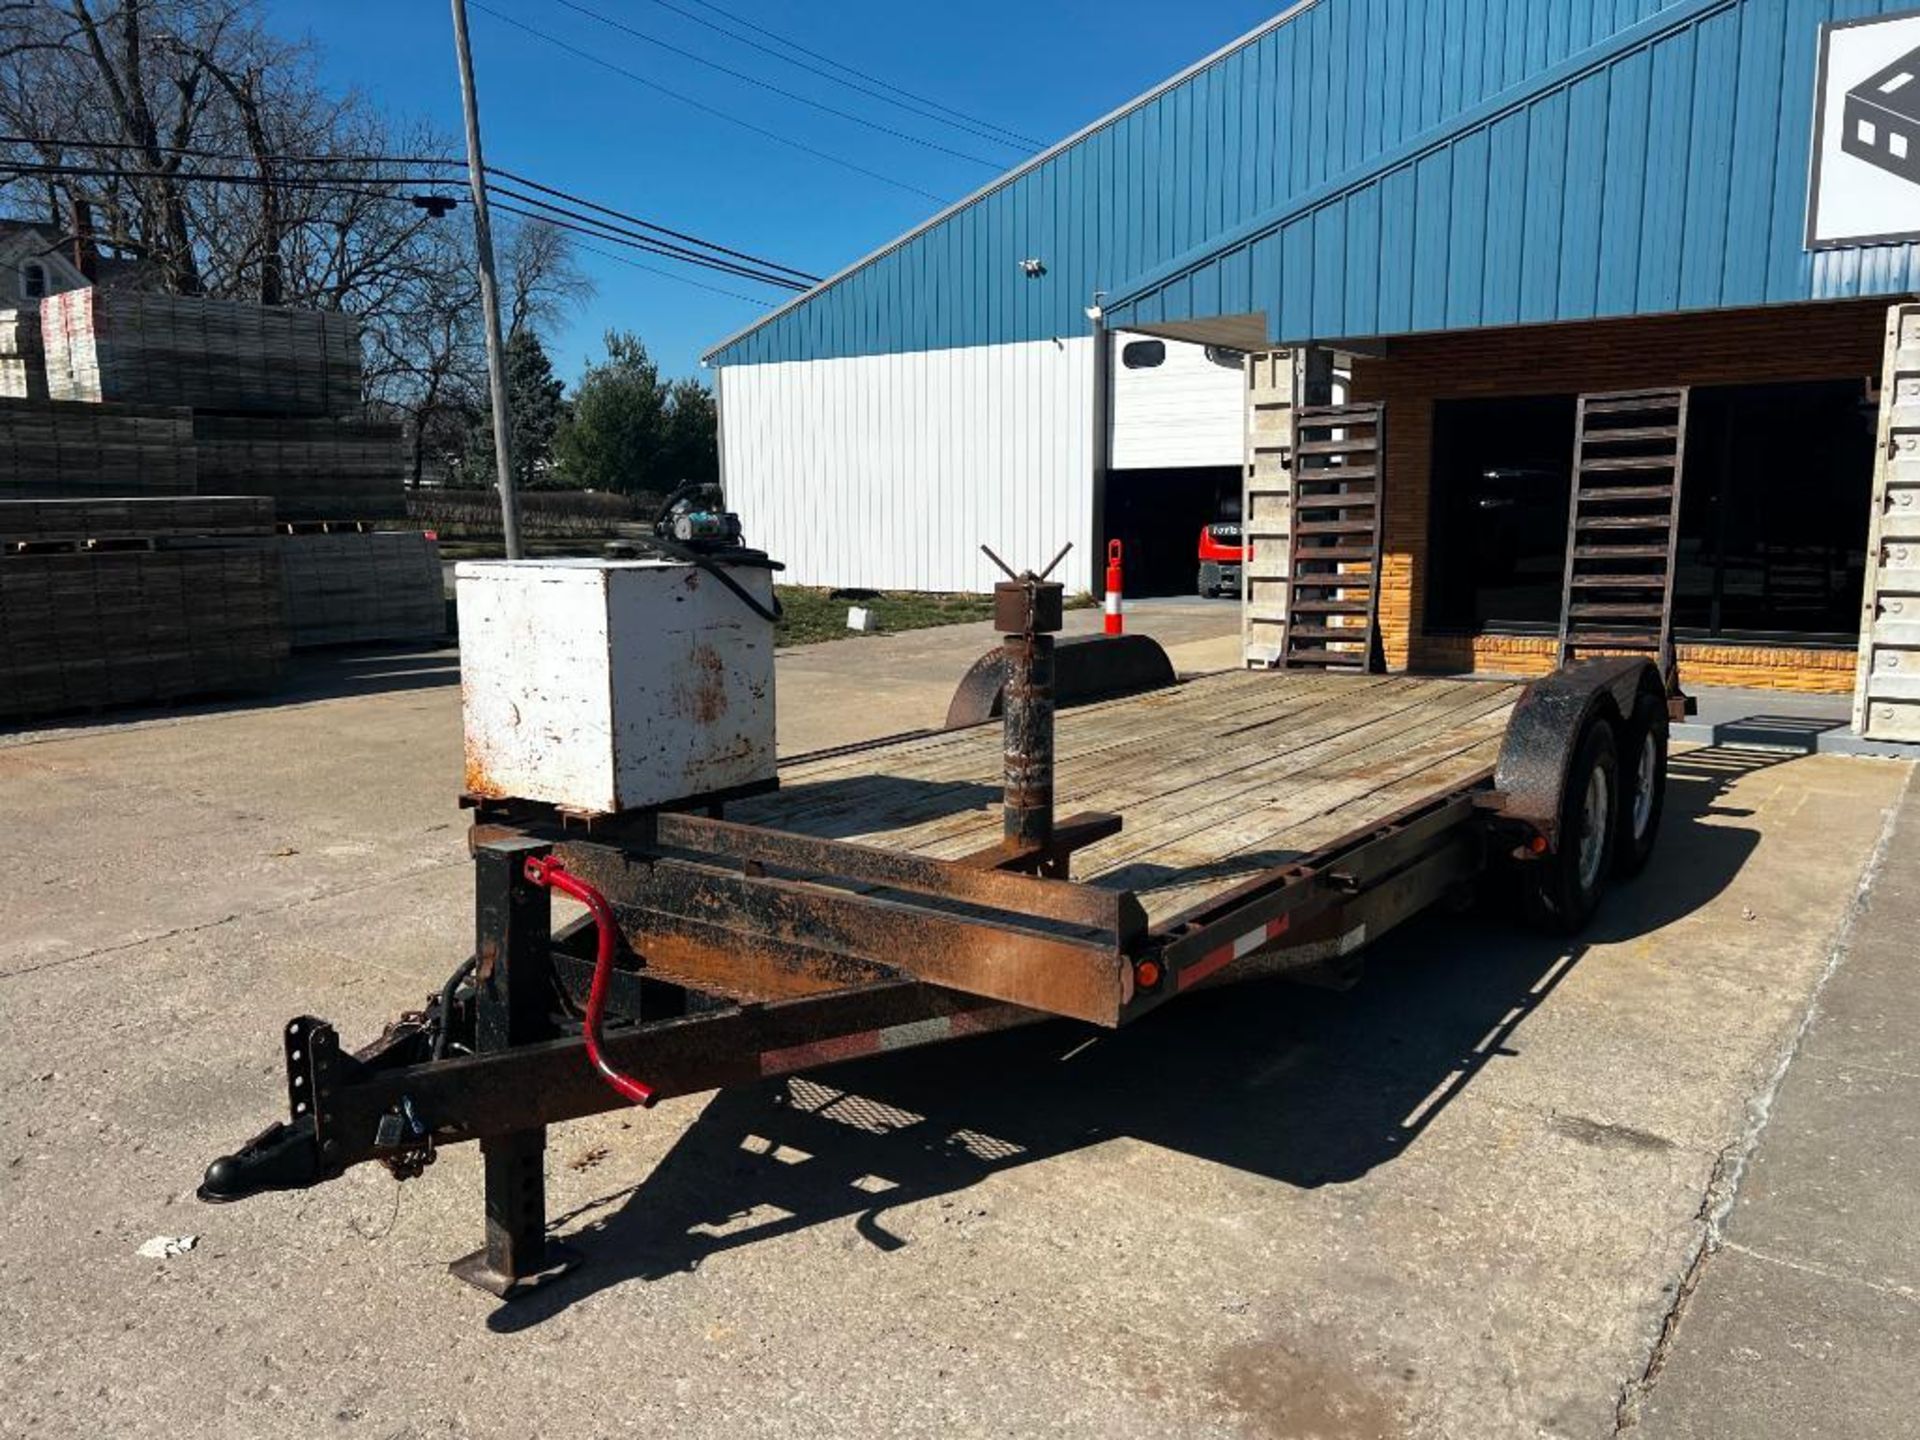 1999 R & W Trailer, 20' x 83", 8 bolt rims, fuel tank and pump, with ramps, fork pockets